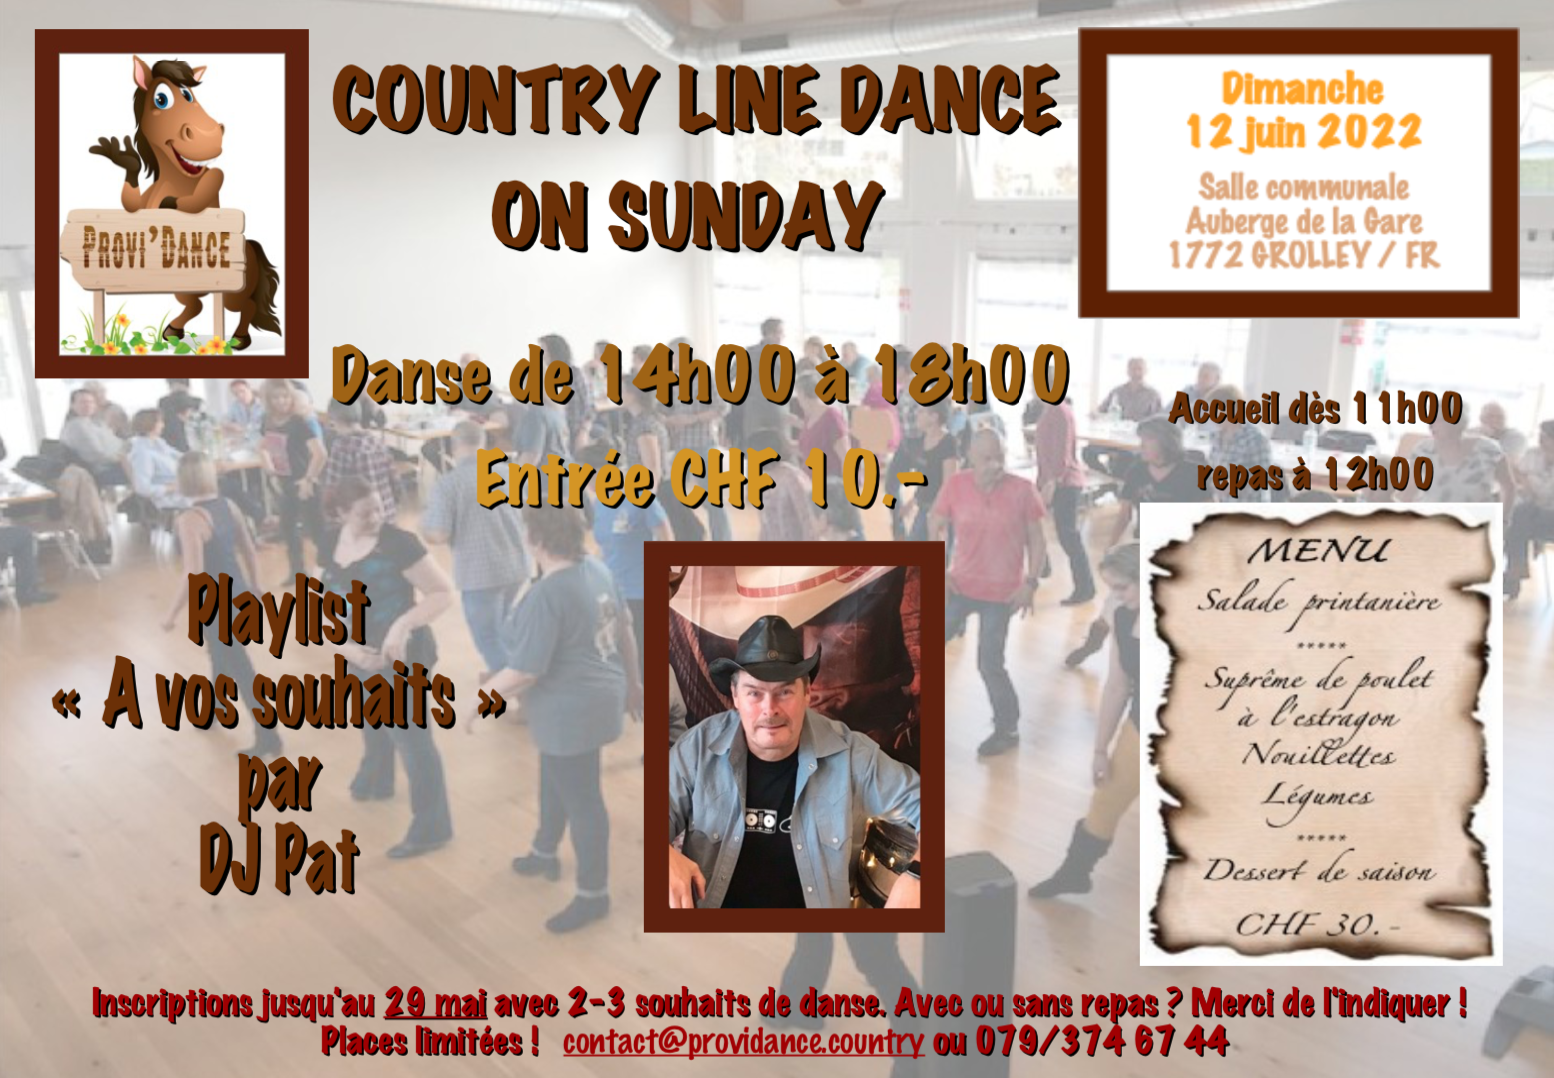 Country on Sunday 12 juin 2022 Grolley / Fribourg